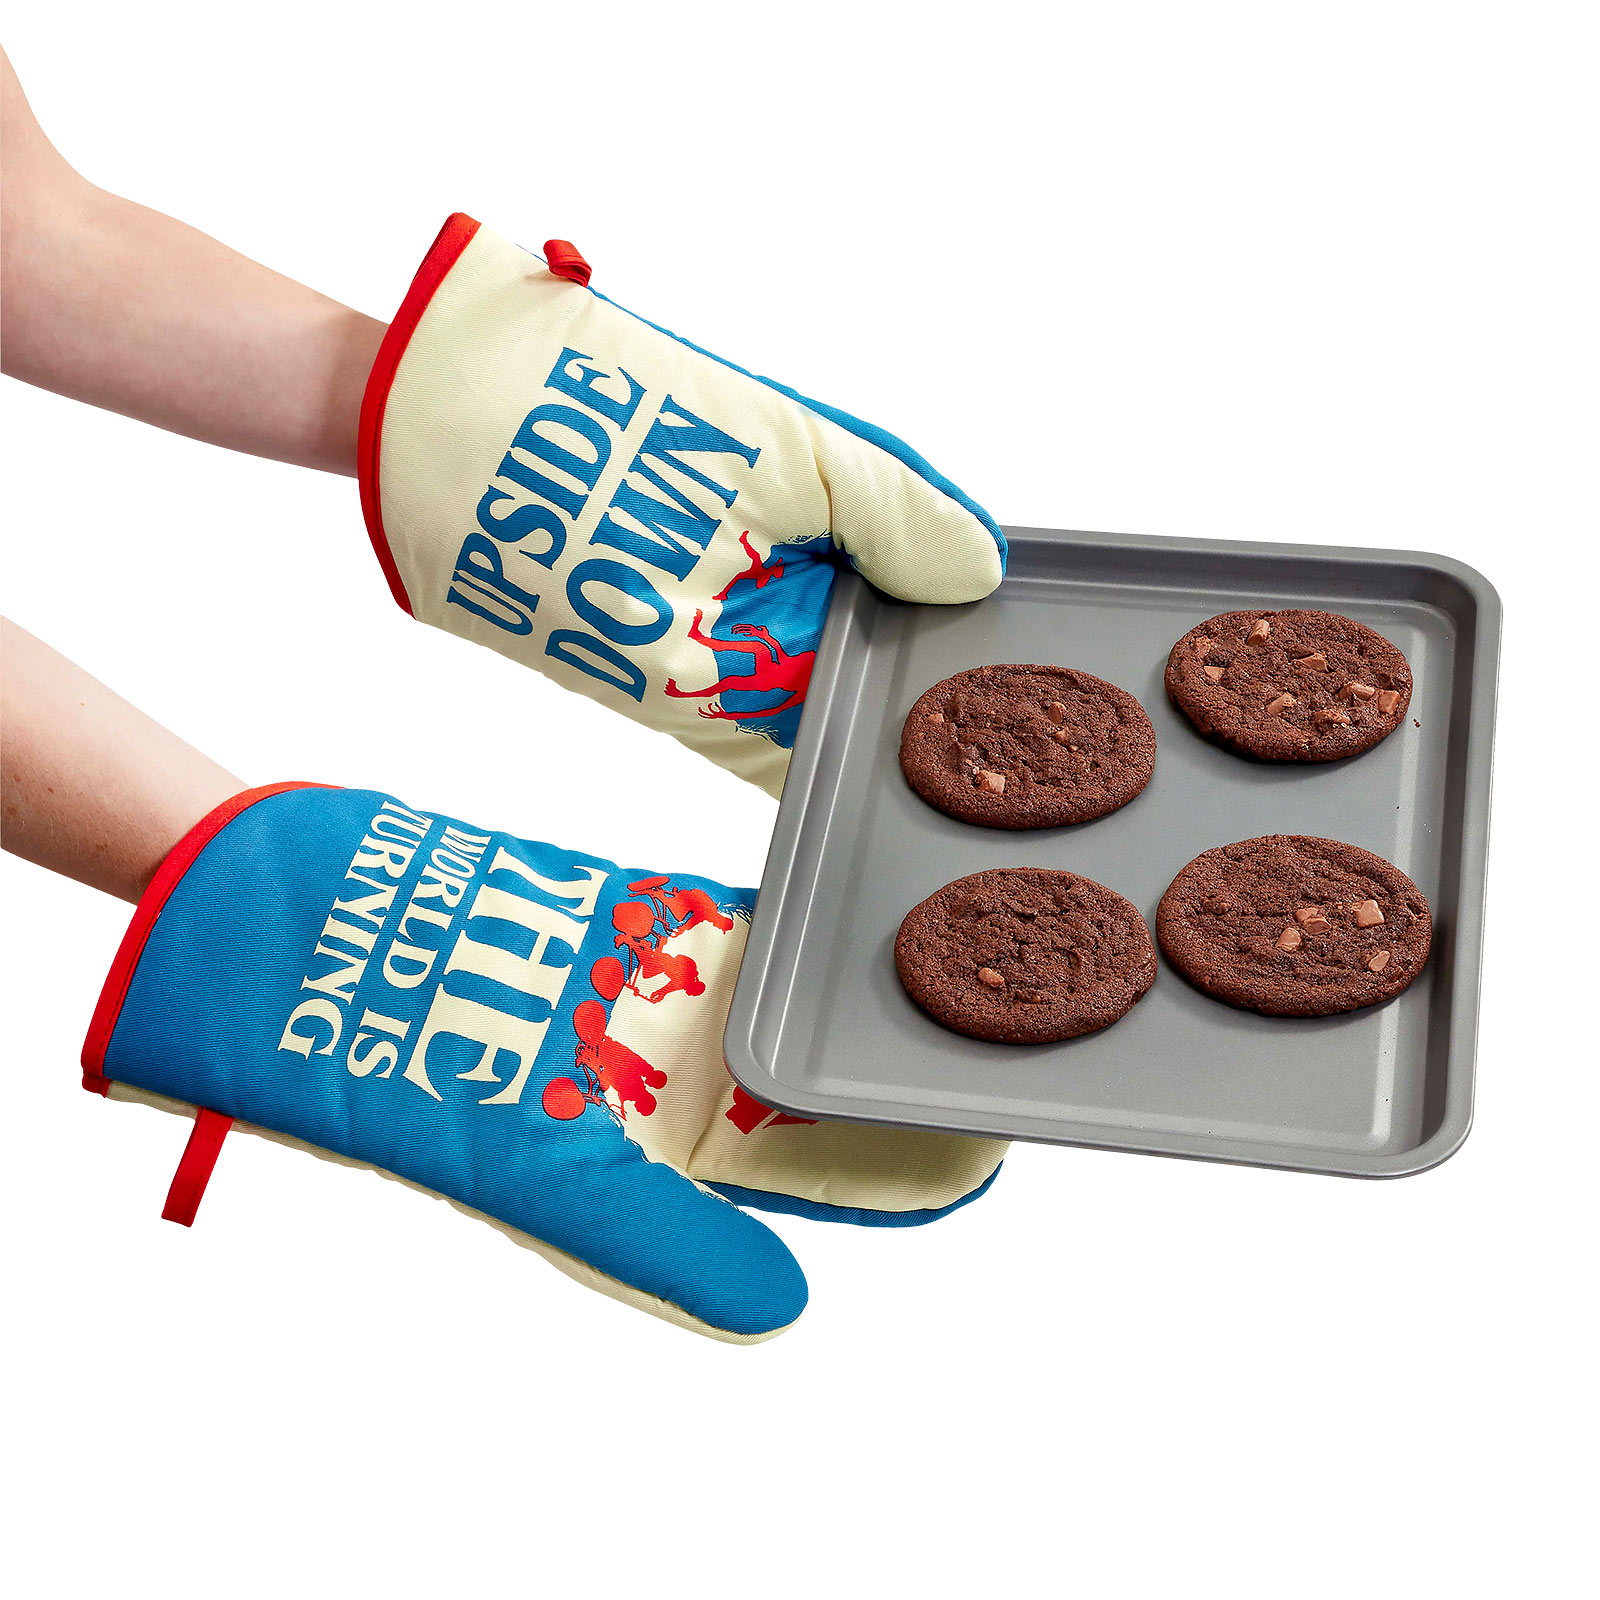 Stranger Things - Upside Down Oven Glove 2-piece Set